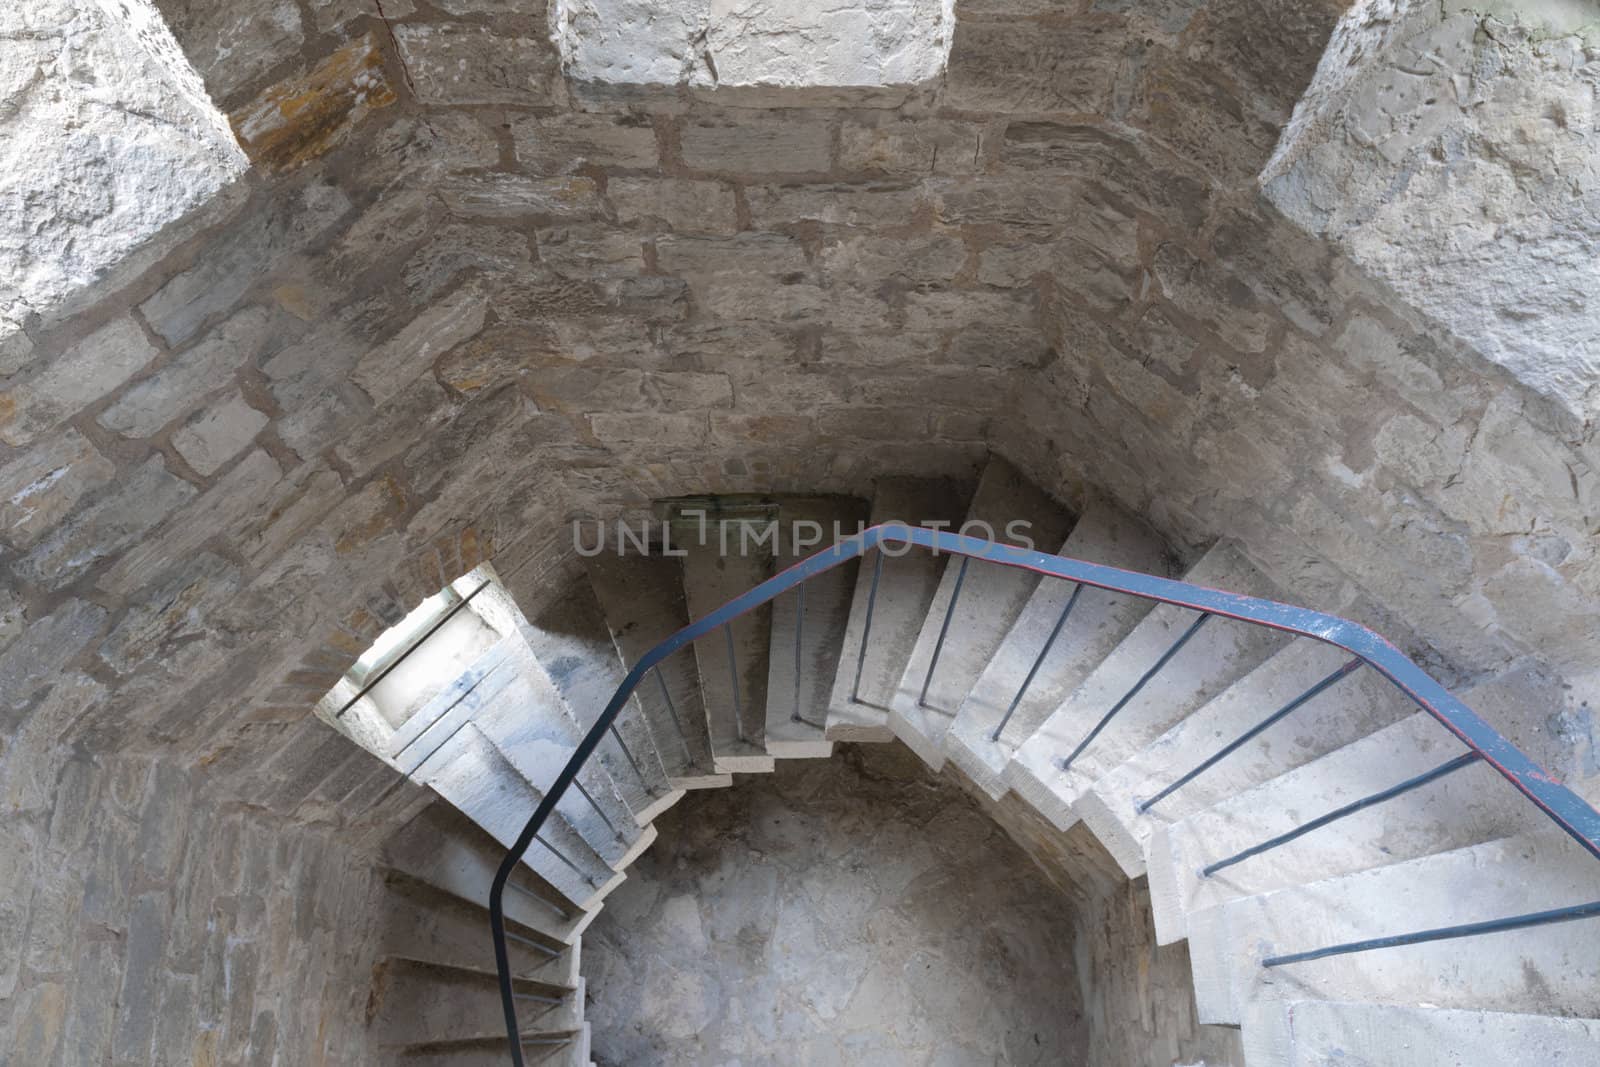 concrete spiral stairs with metallic handrails go down